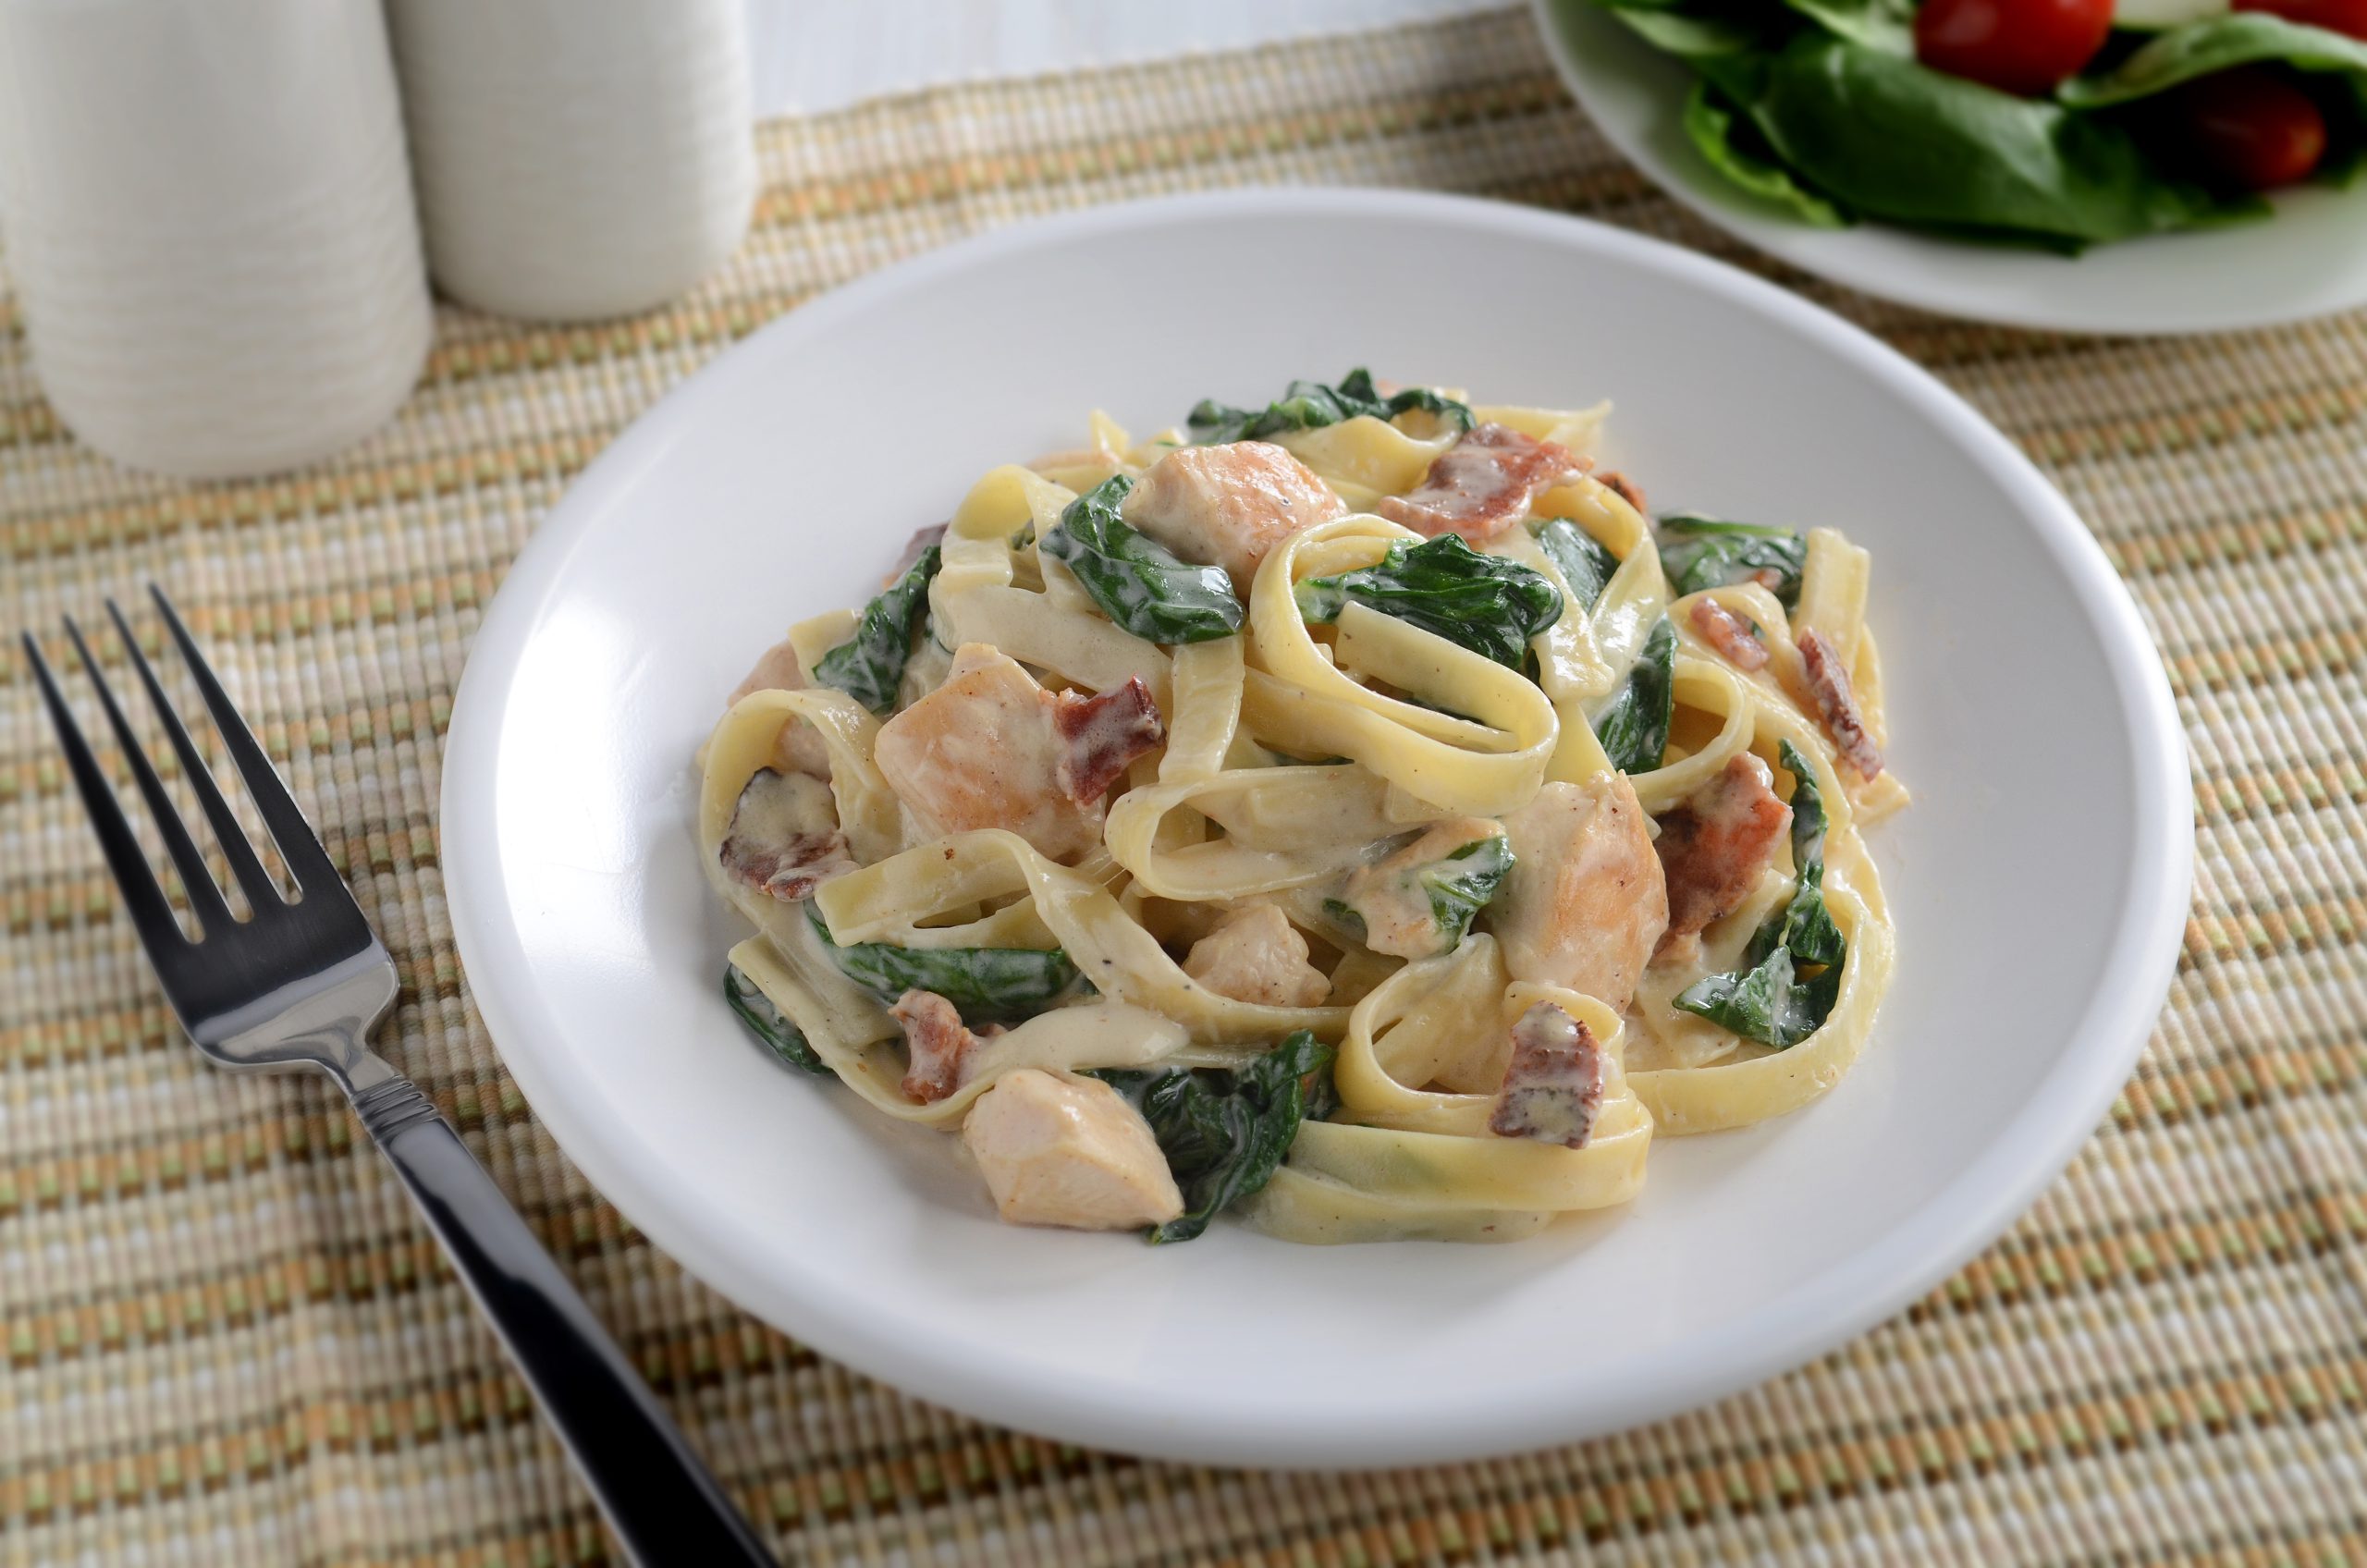 Linguine with bacon, Alfredo sauce, diced chicken, fresh spinach, and Parmesan cheese